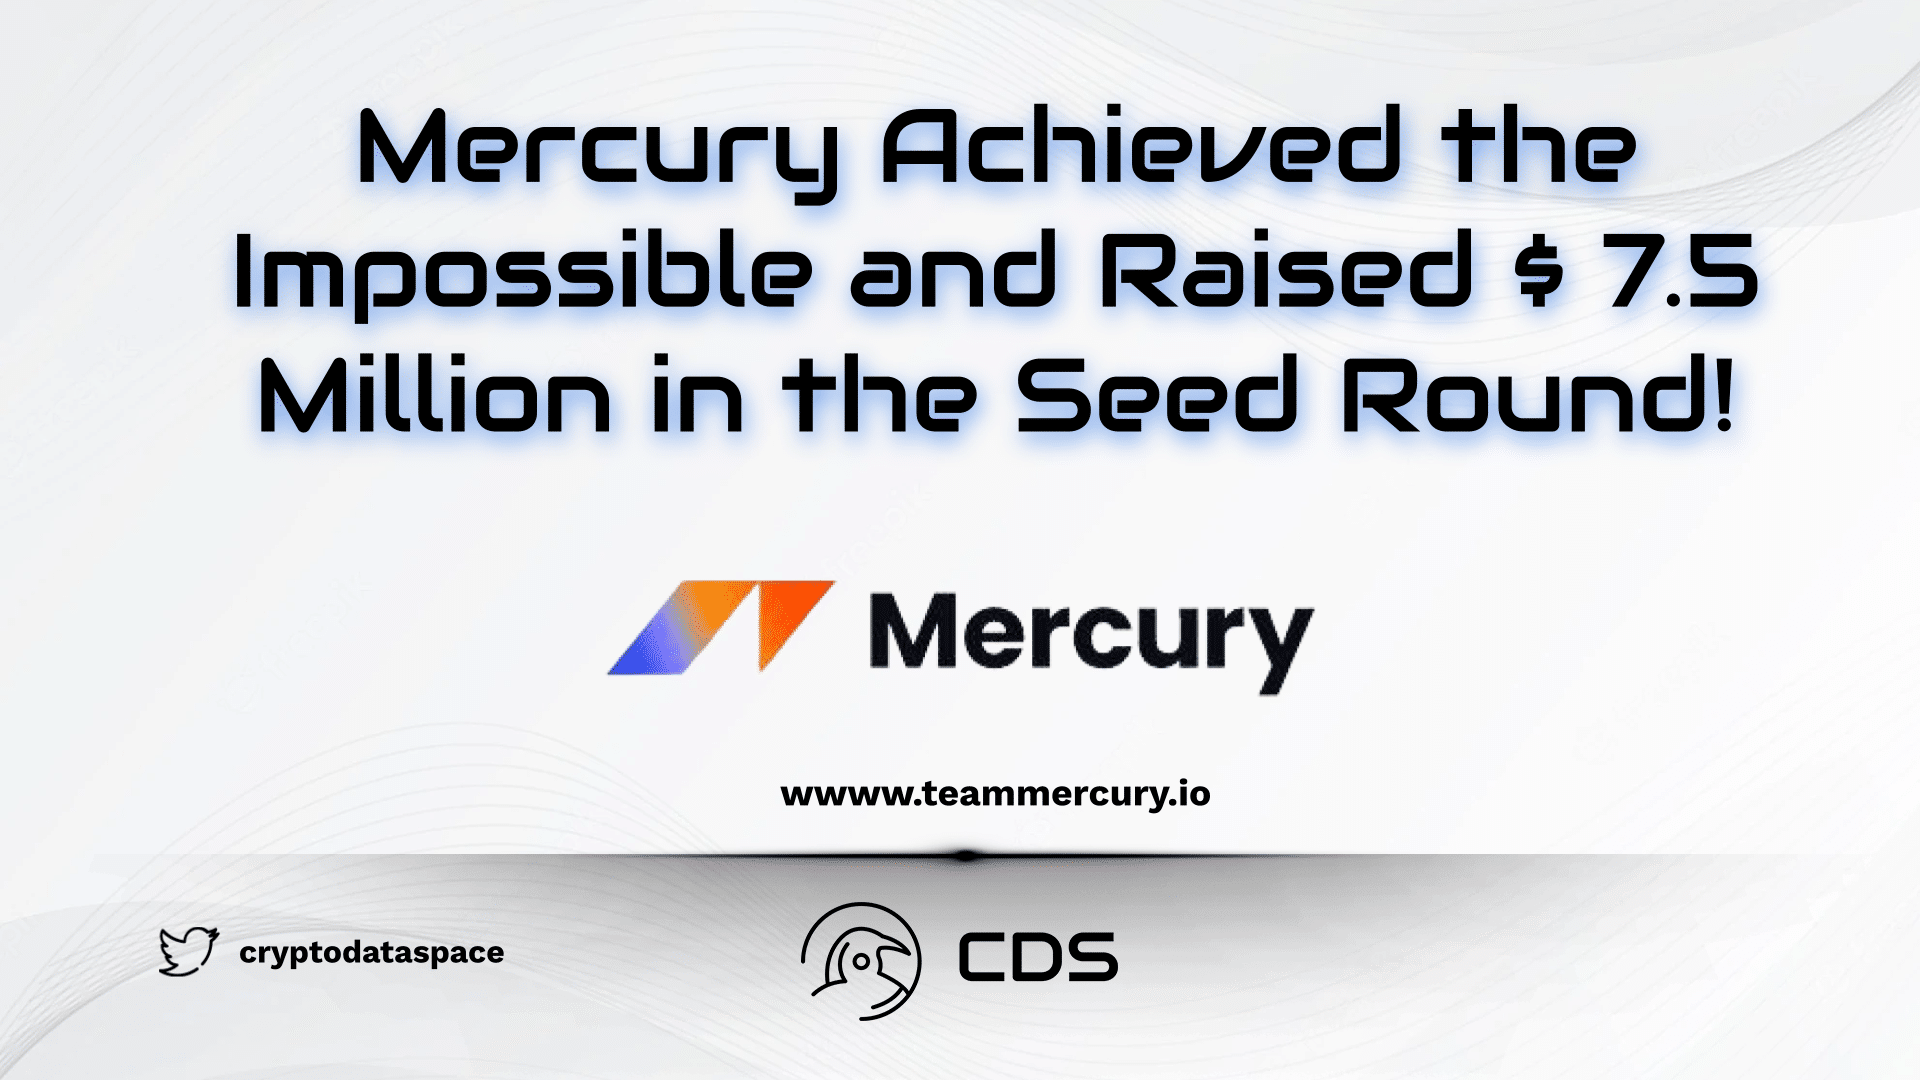 Mercury Achieved the Impossible and Raised $ 7.5 Million in the Seed Round!